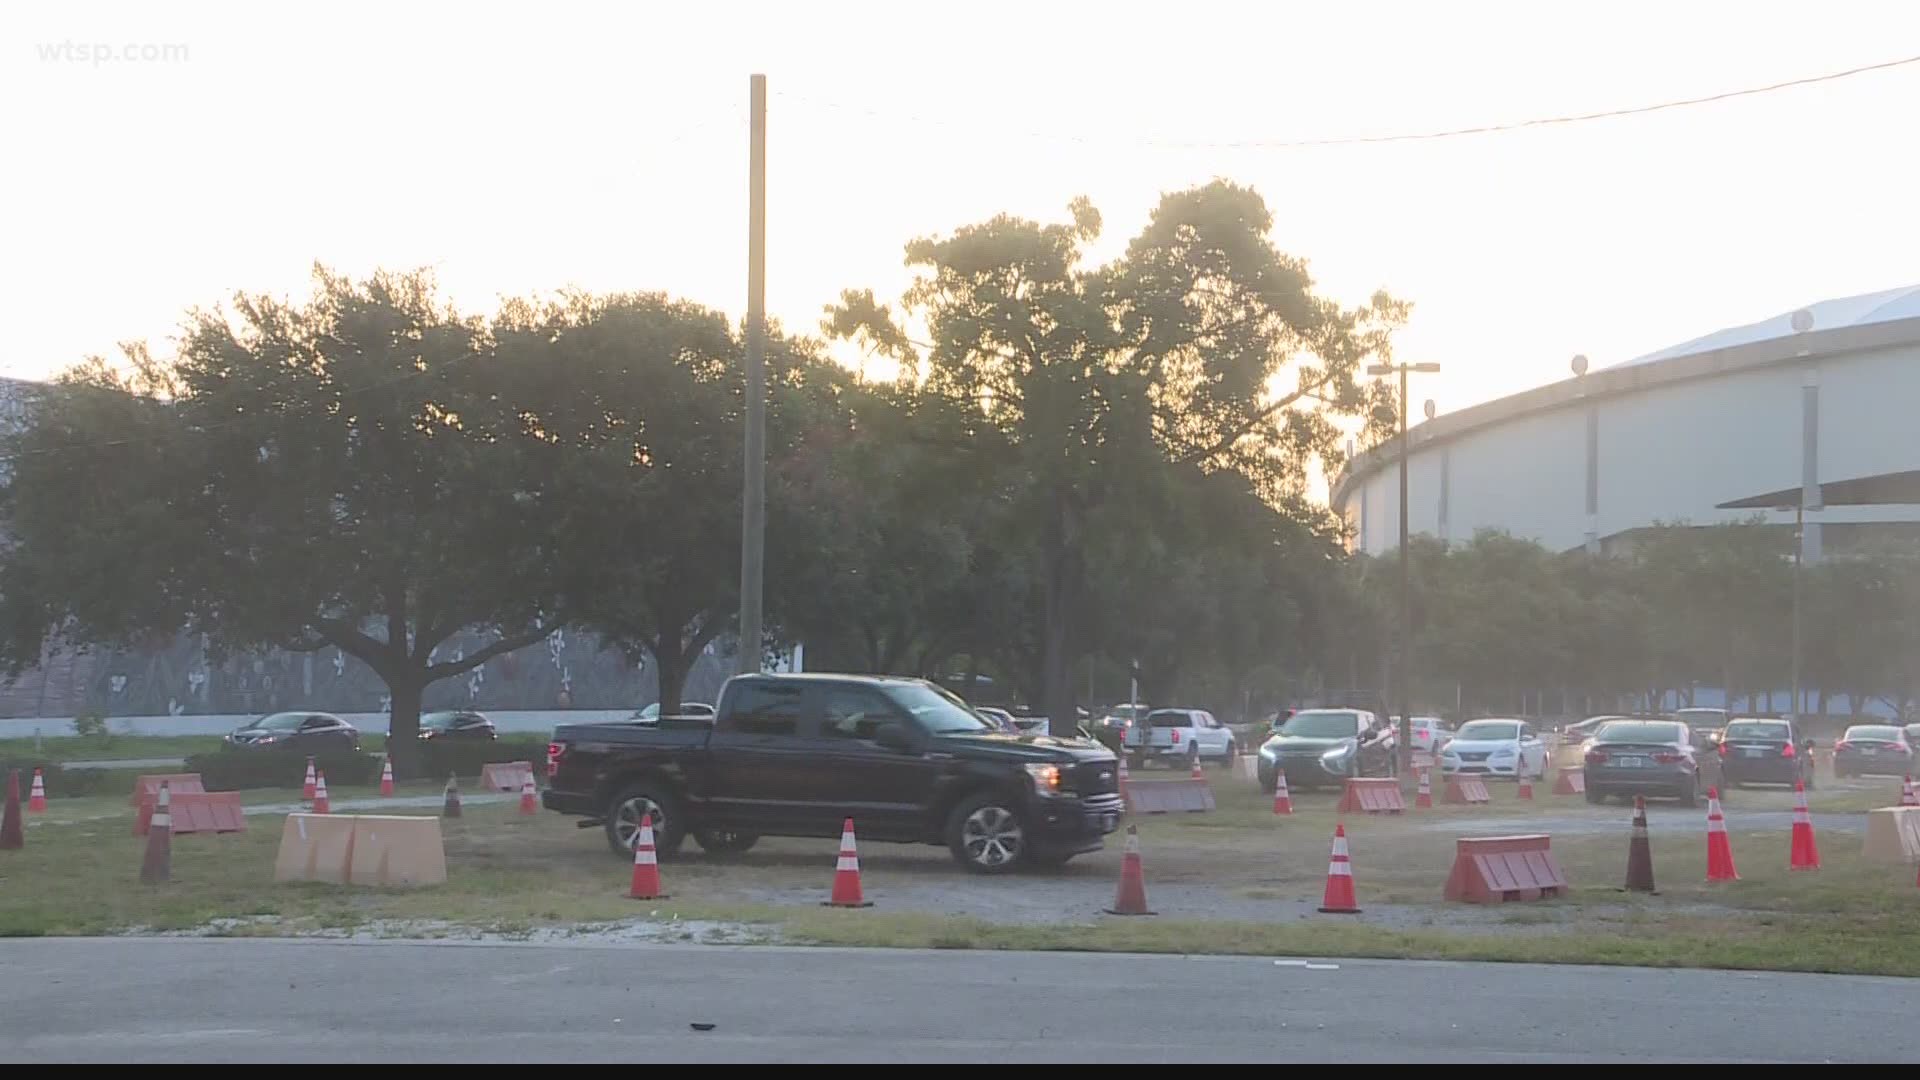 The new drive-thru testing site at Tropicana Field opened at 7 a.m. this morning, but closed in about an hour after it reached testing capacity.